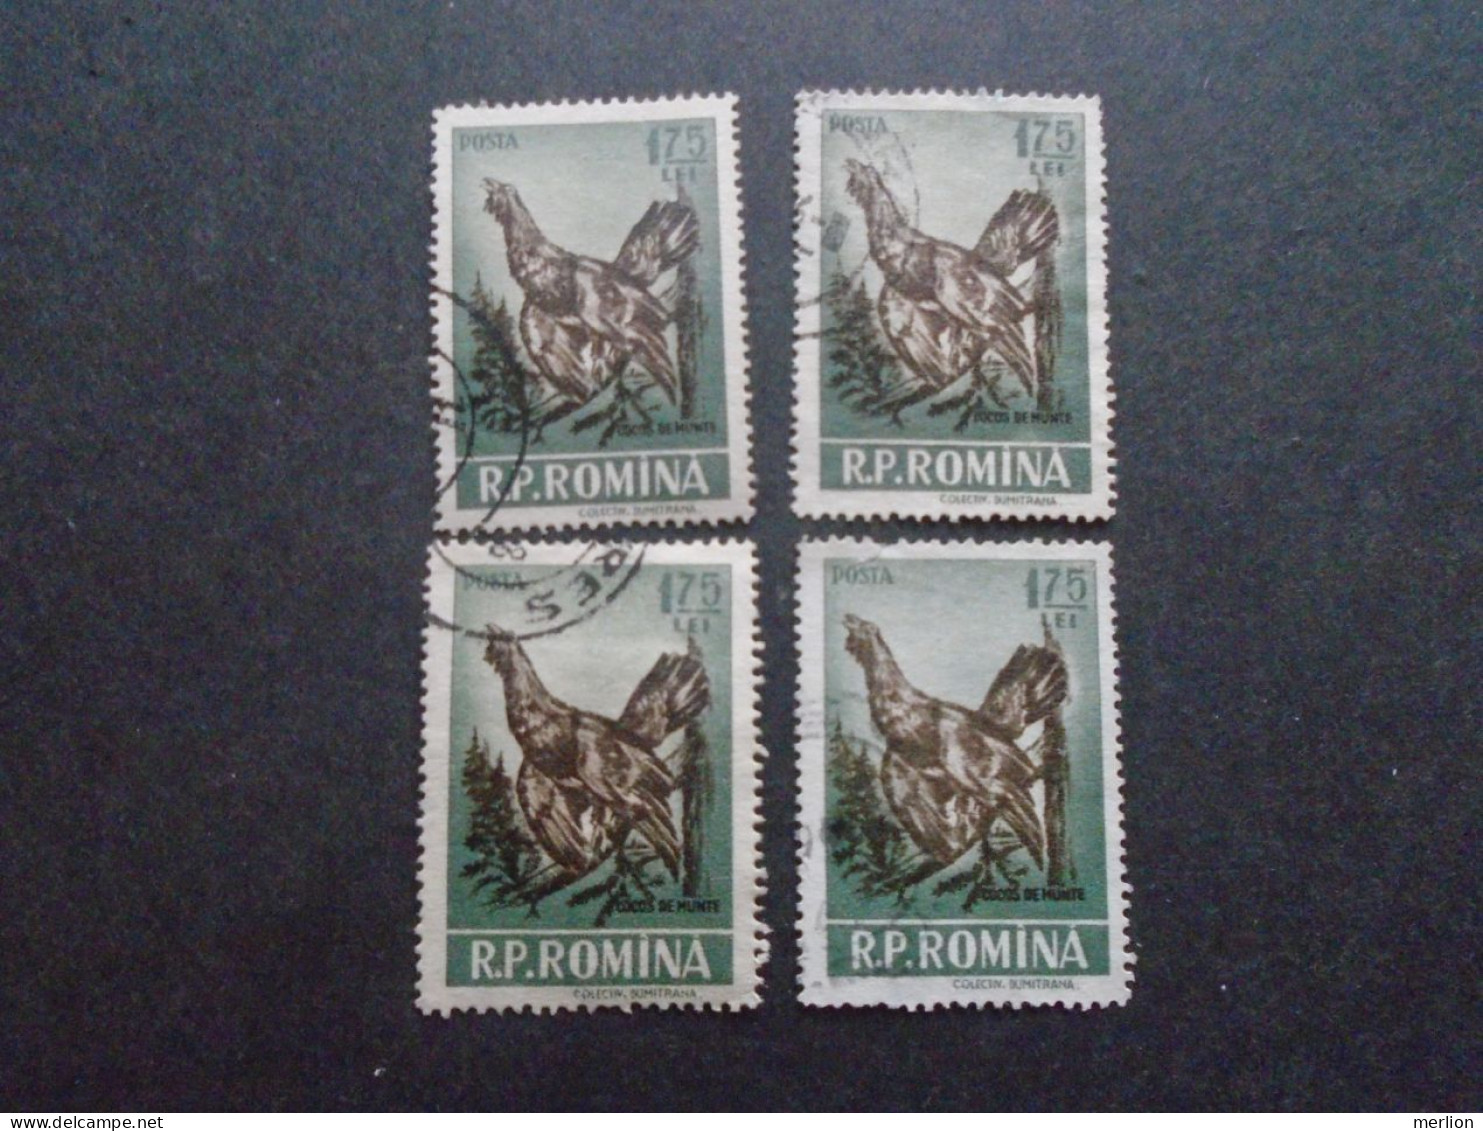 D202280  Romania - 1955  -  Lot Of 4 Used Stamps  Blackcock  Grouse  1573 - Gebruikt